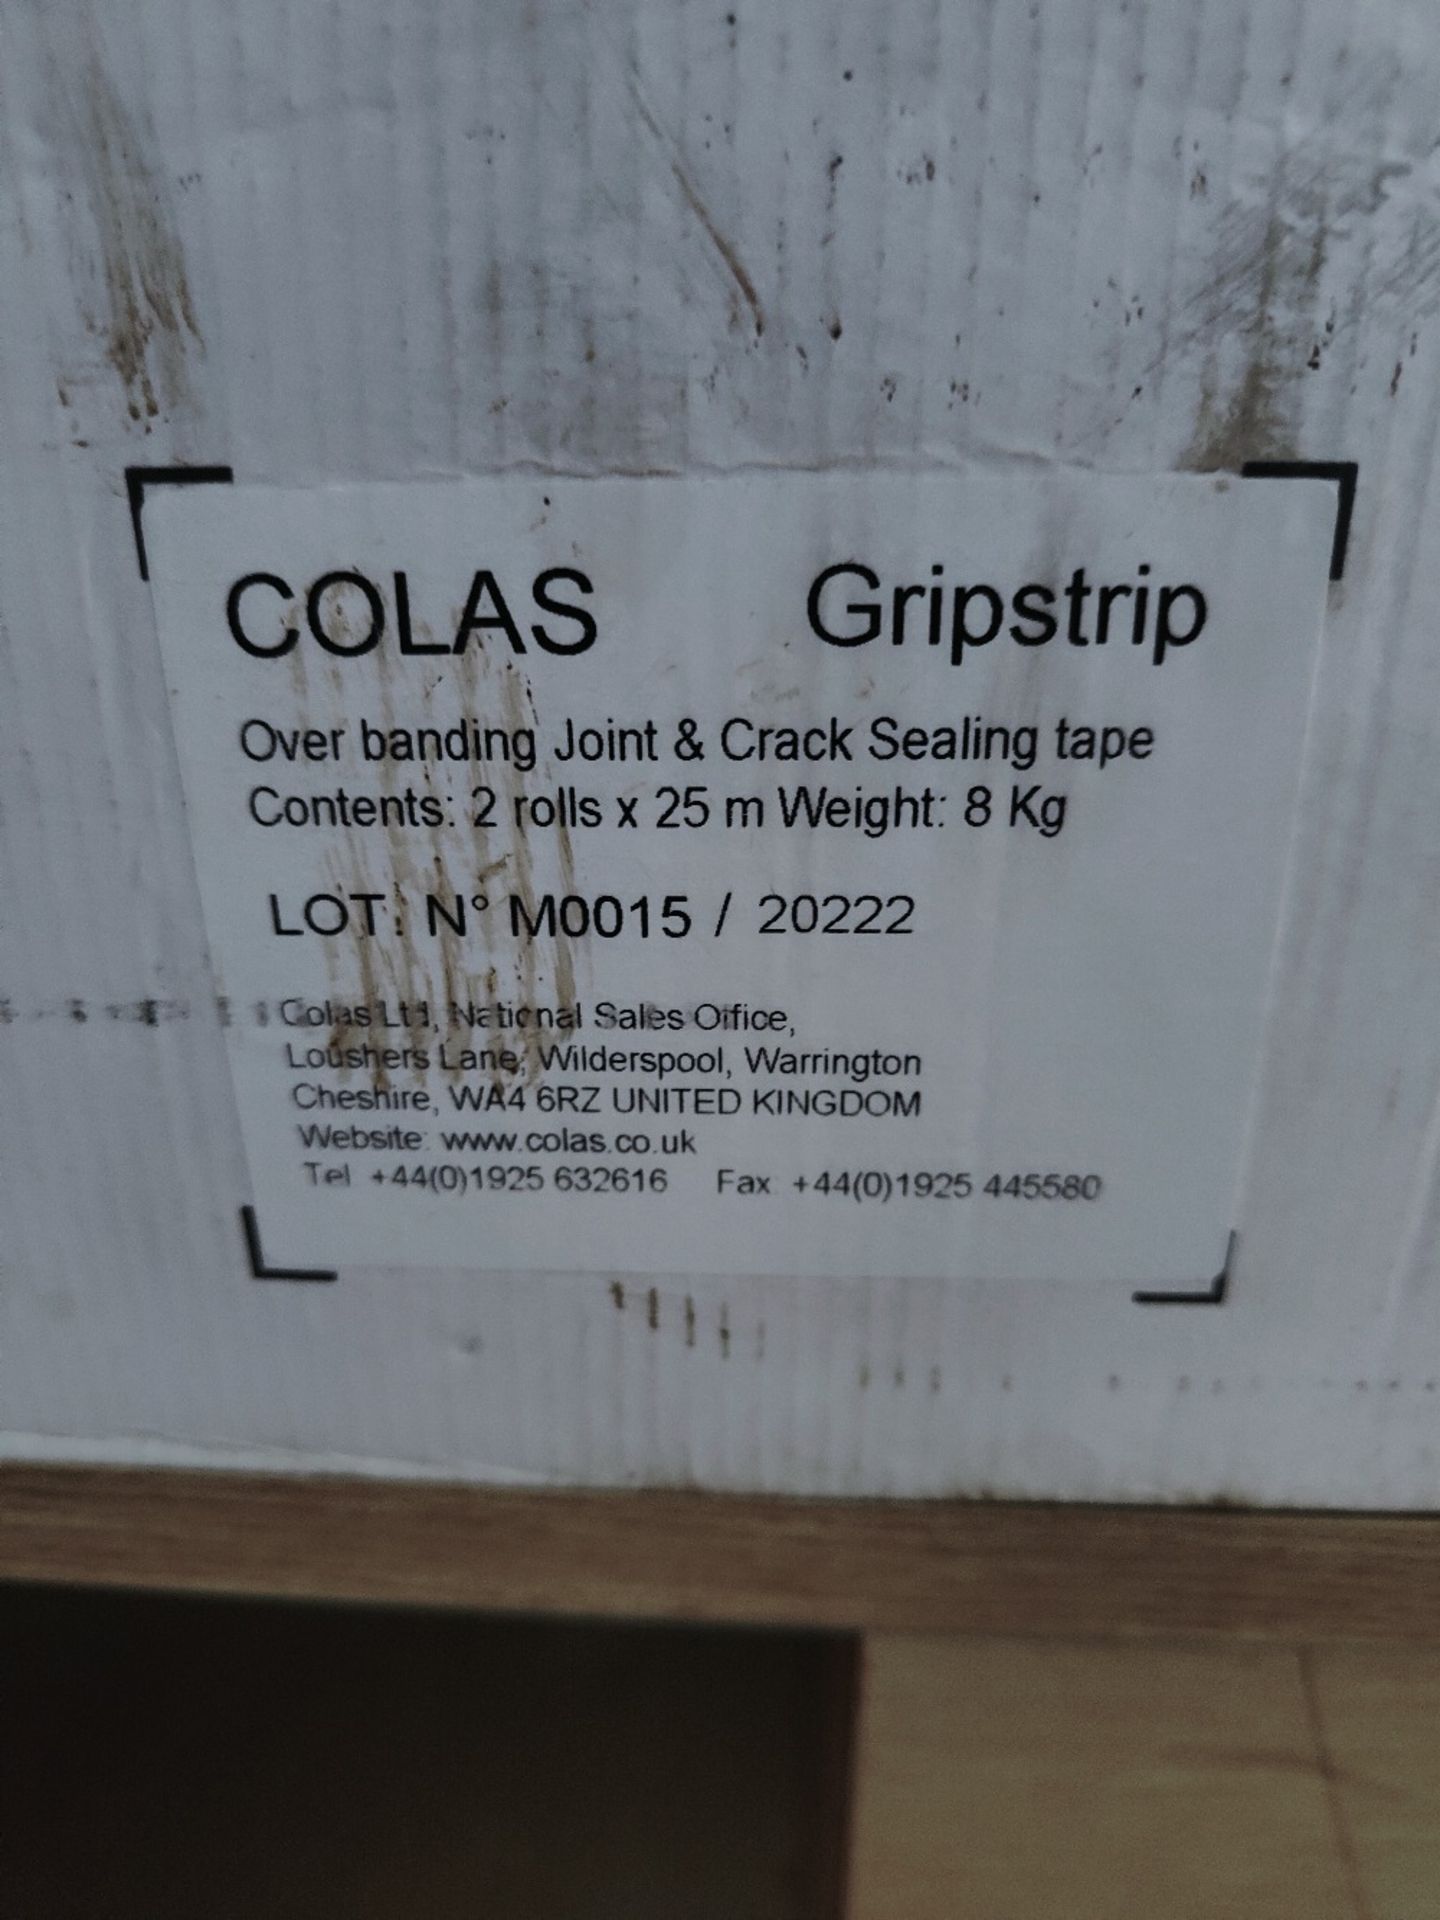 Colas Gripstrip over banding joint and crack sealing tape - Image 3 of 3